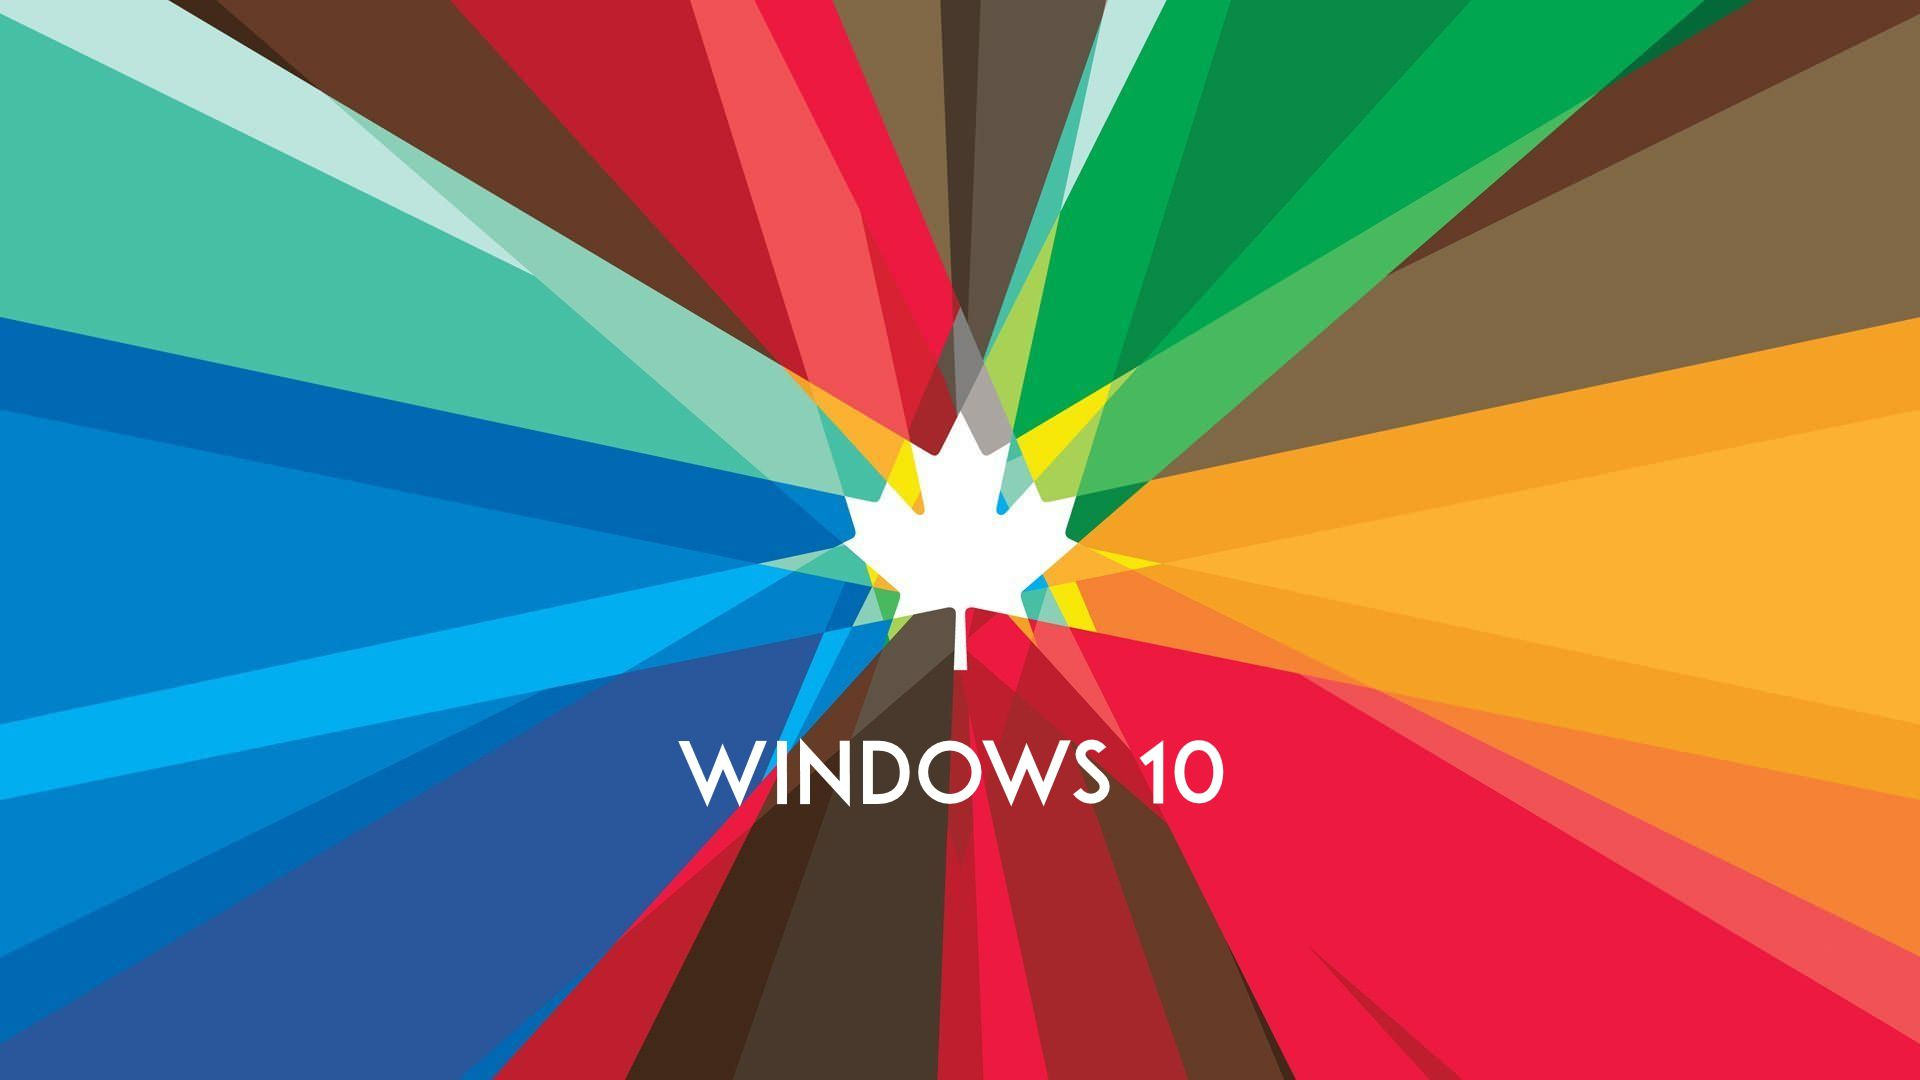 FREE 21+ Windows 10 Wallpapers in PSD